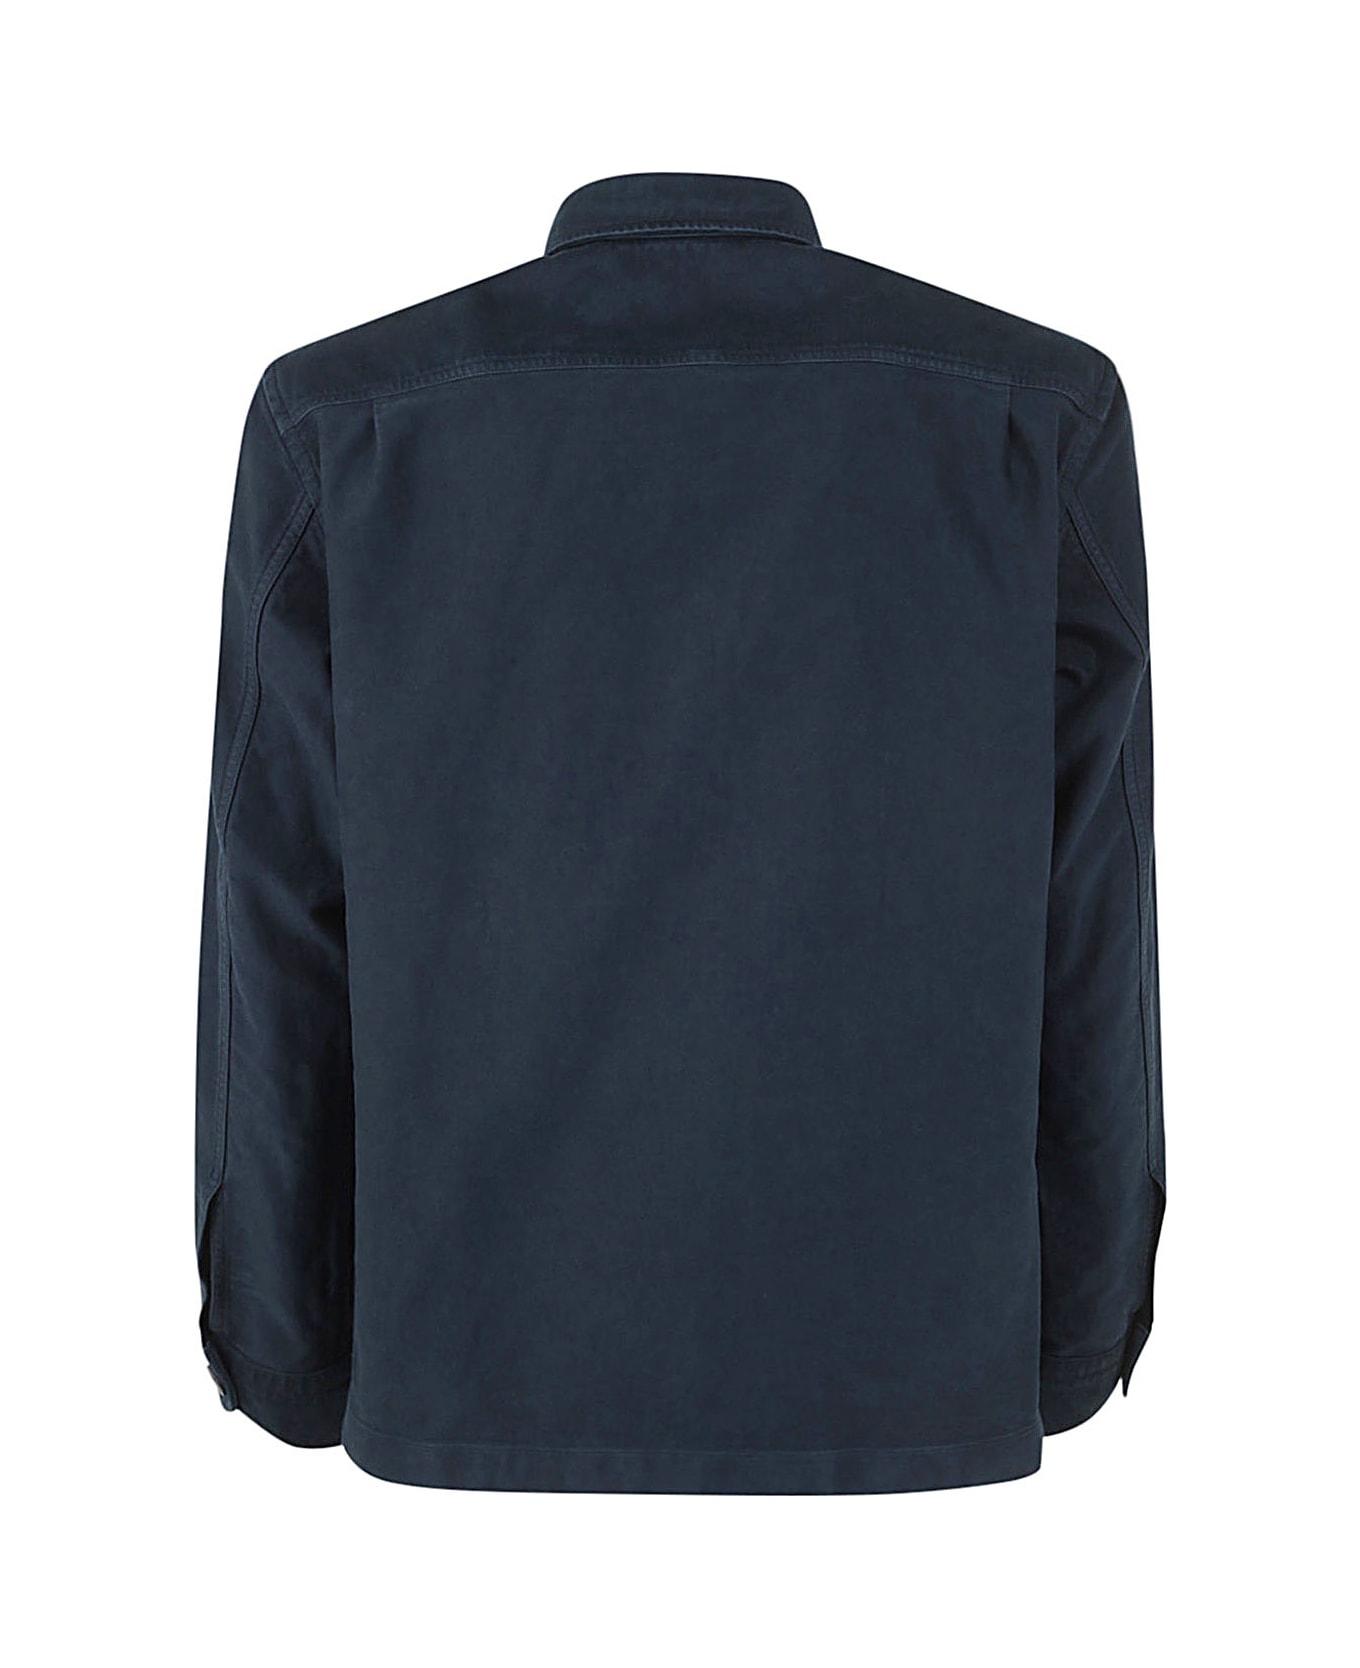 Tom Ford Casual Shirt - Midnight Blue シャツ